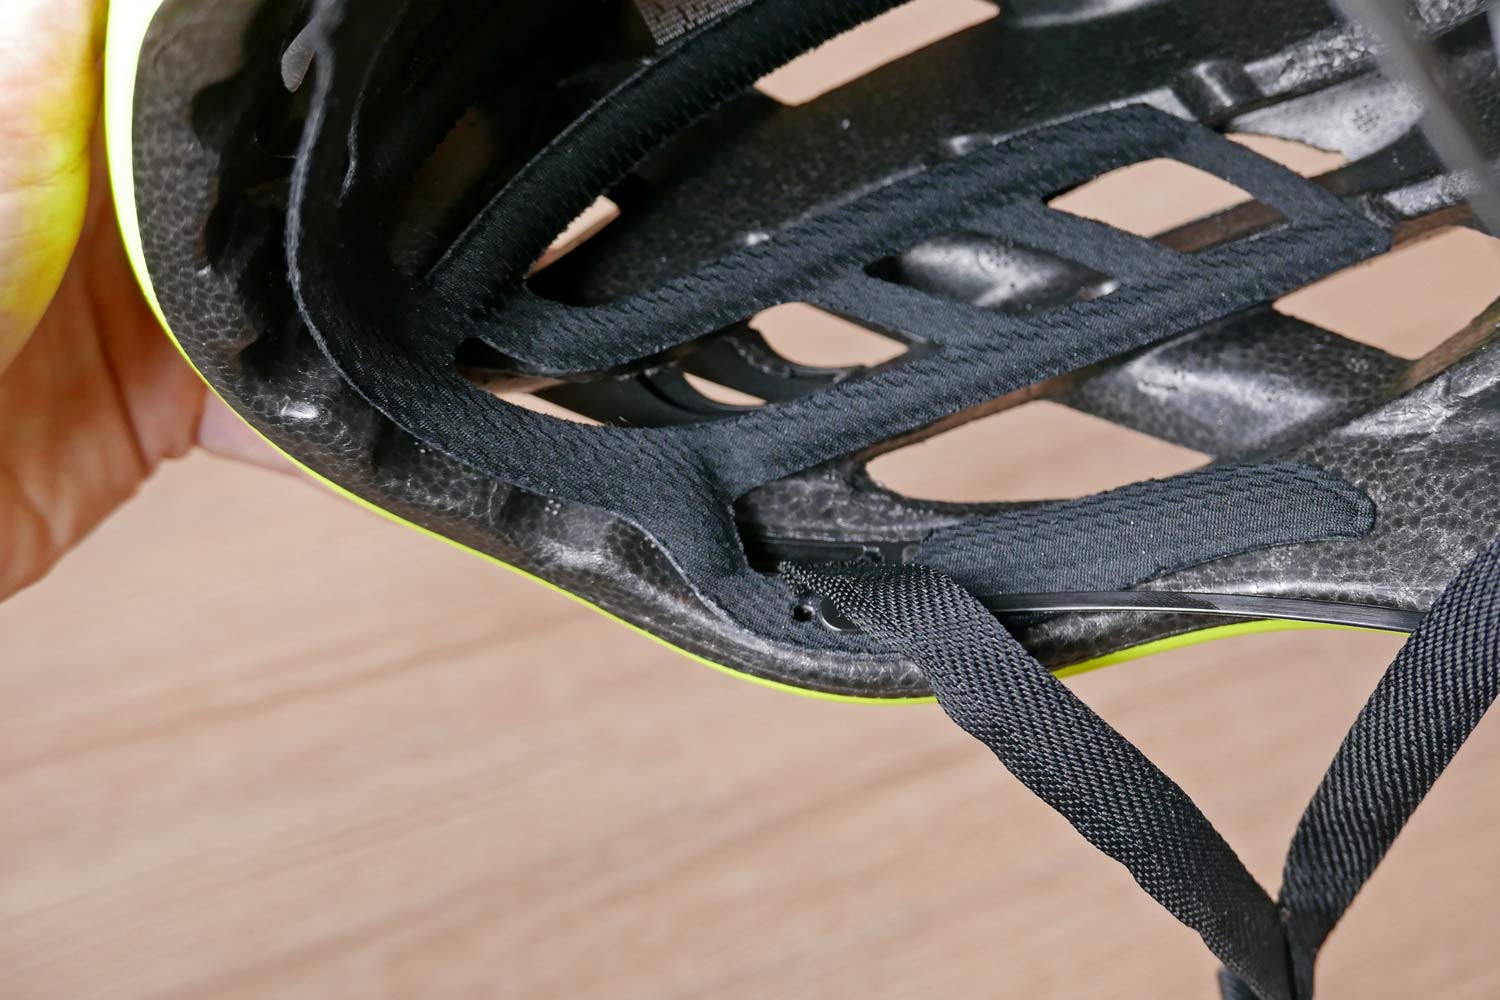 Abus Airbreaker Review  EOY ThrillGear Roundup – Thrillhouse Cycling